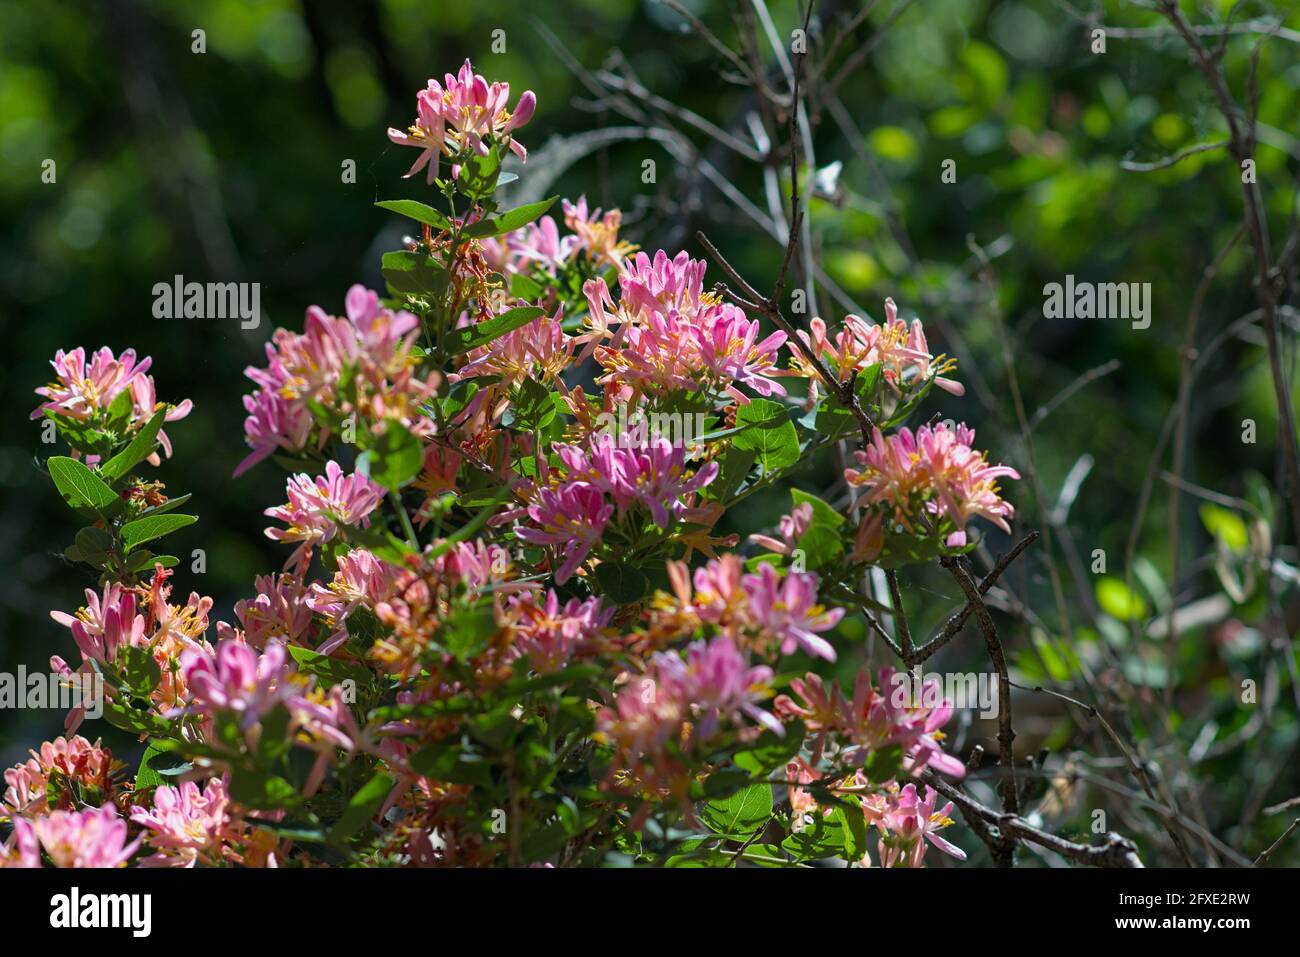 Gorgeous pink blossom of a honeysuckle (Lonicera tatarica) in full spring bloom in a garden in Ottawa, Ontario, Canada. Stock Photo